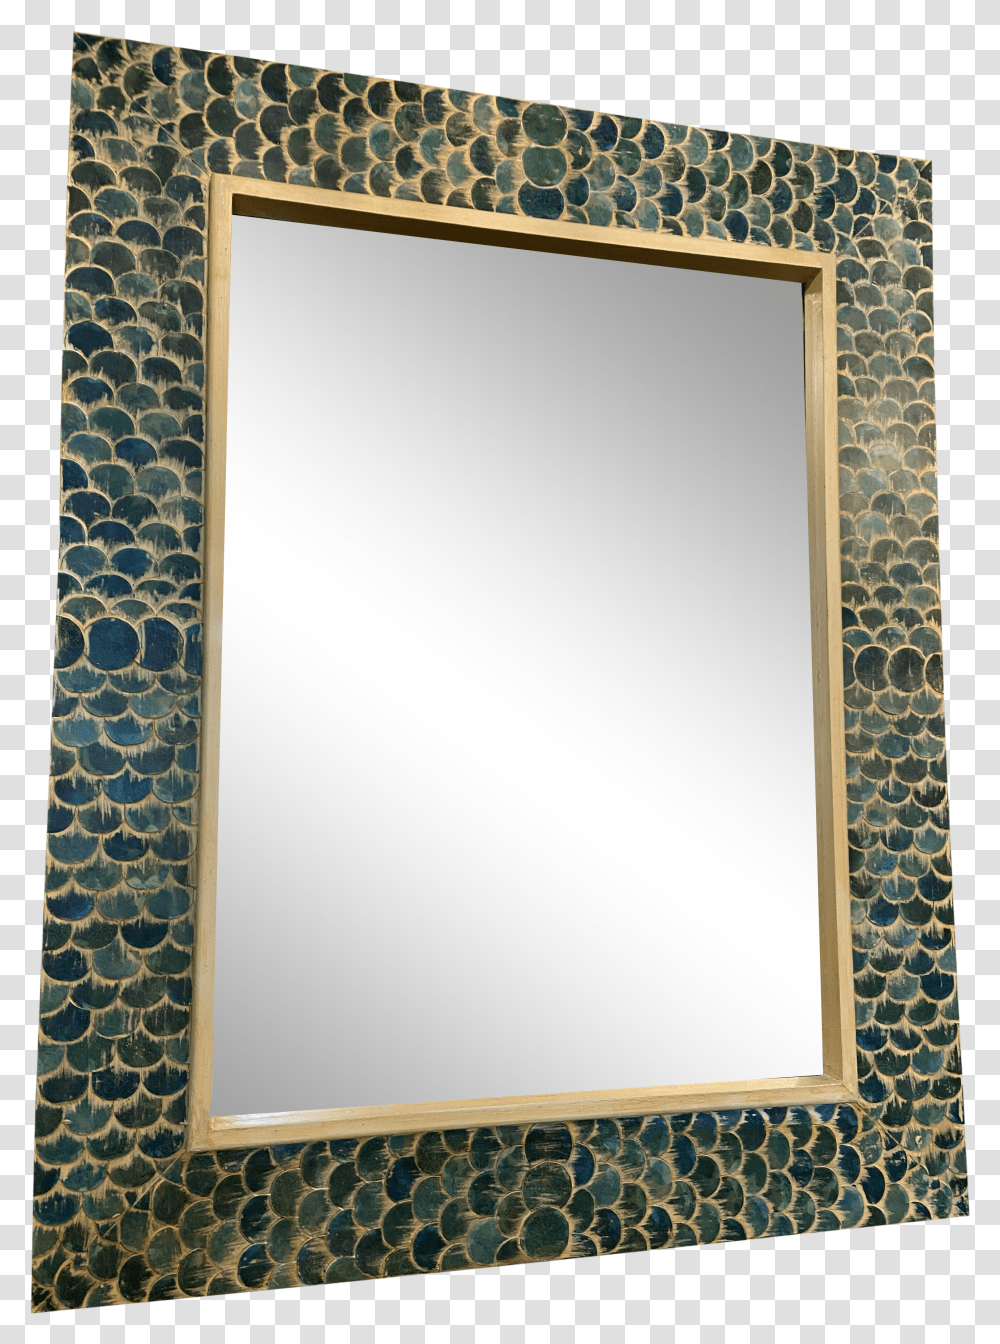 Fish Scale Framed Mirror Horizontal Transparent Png